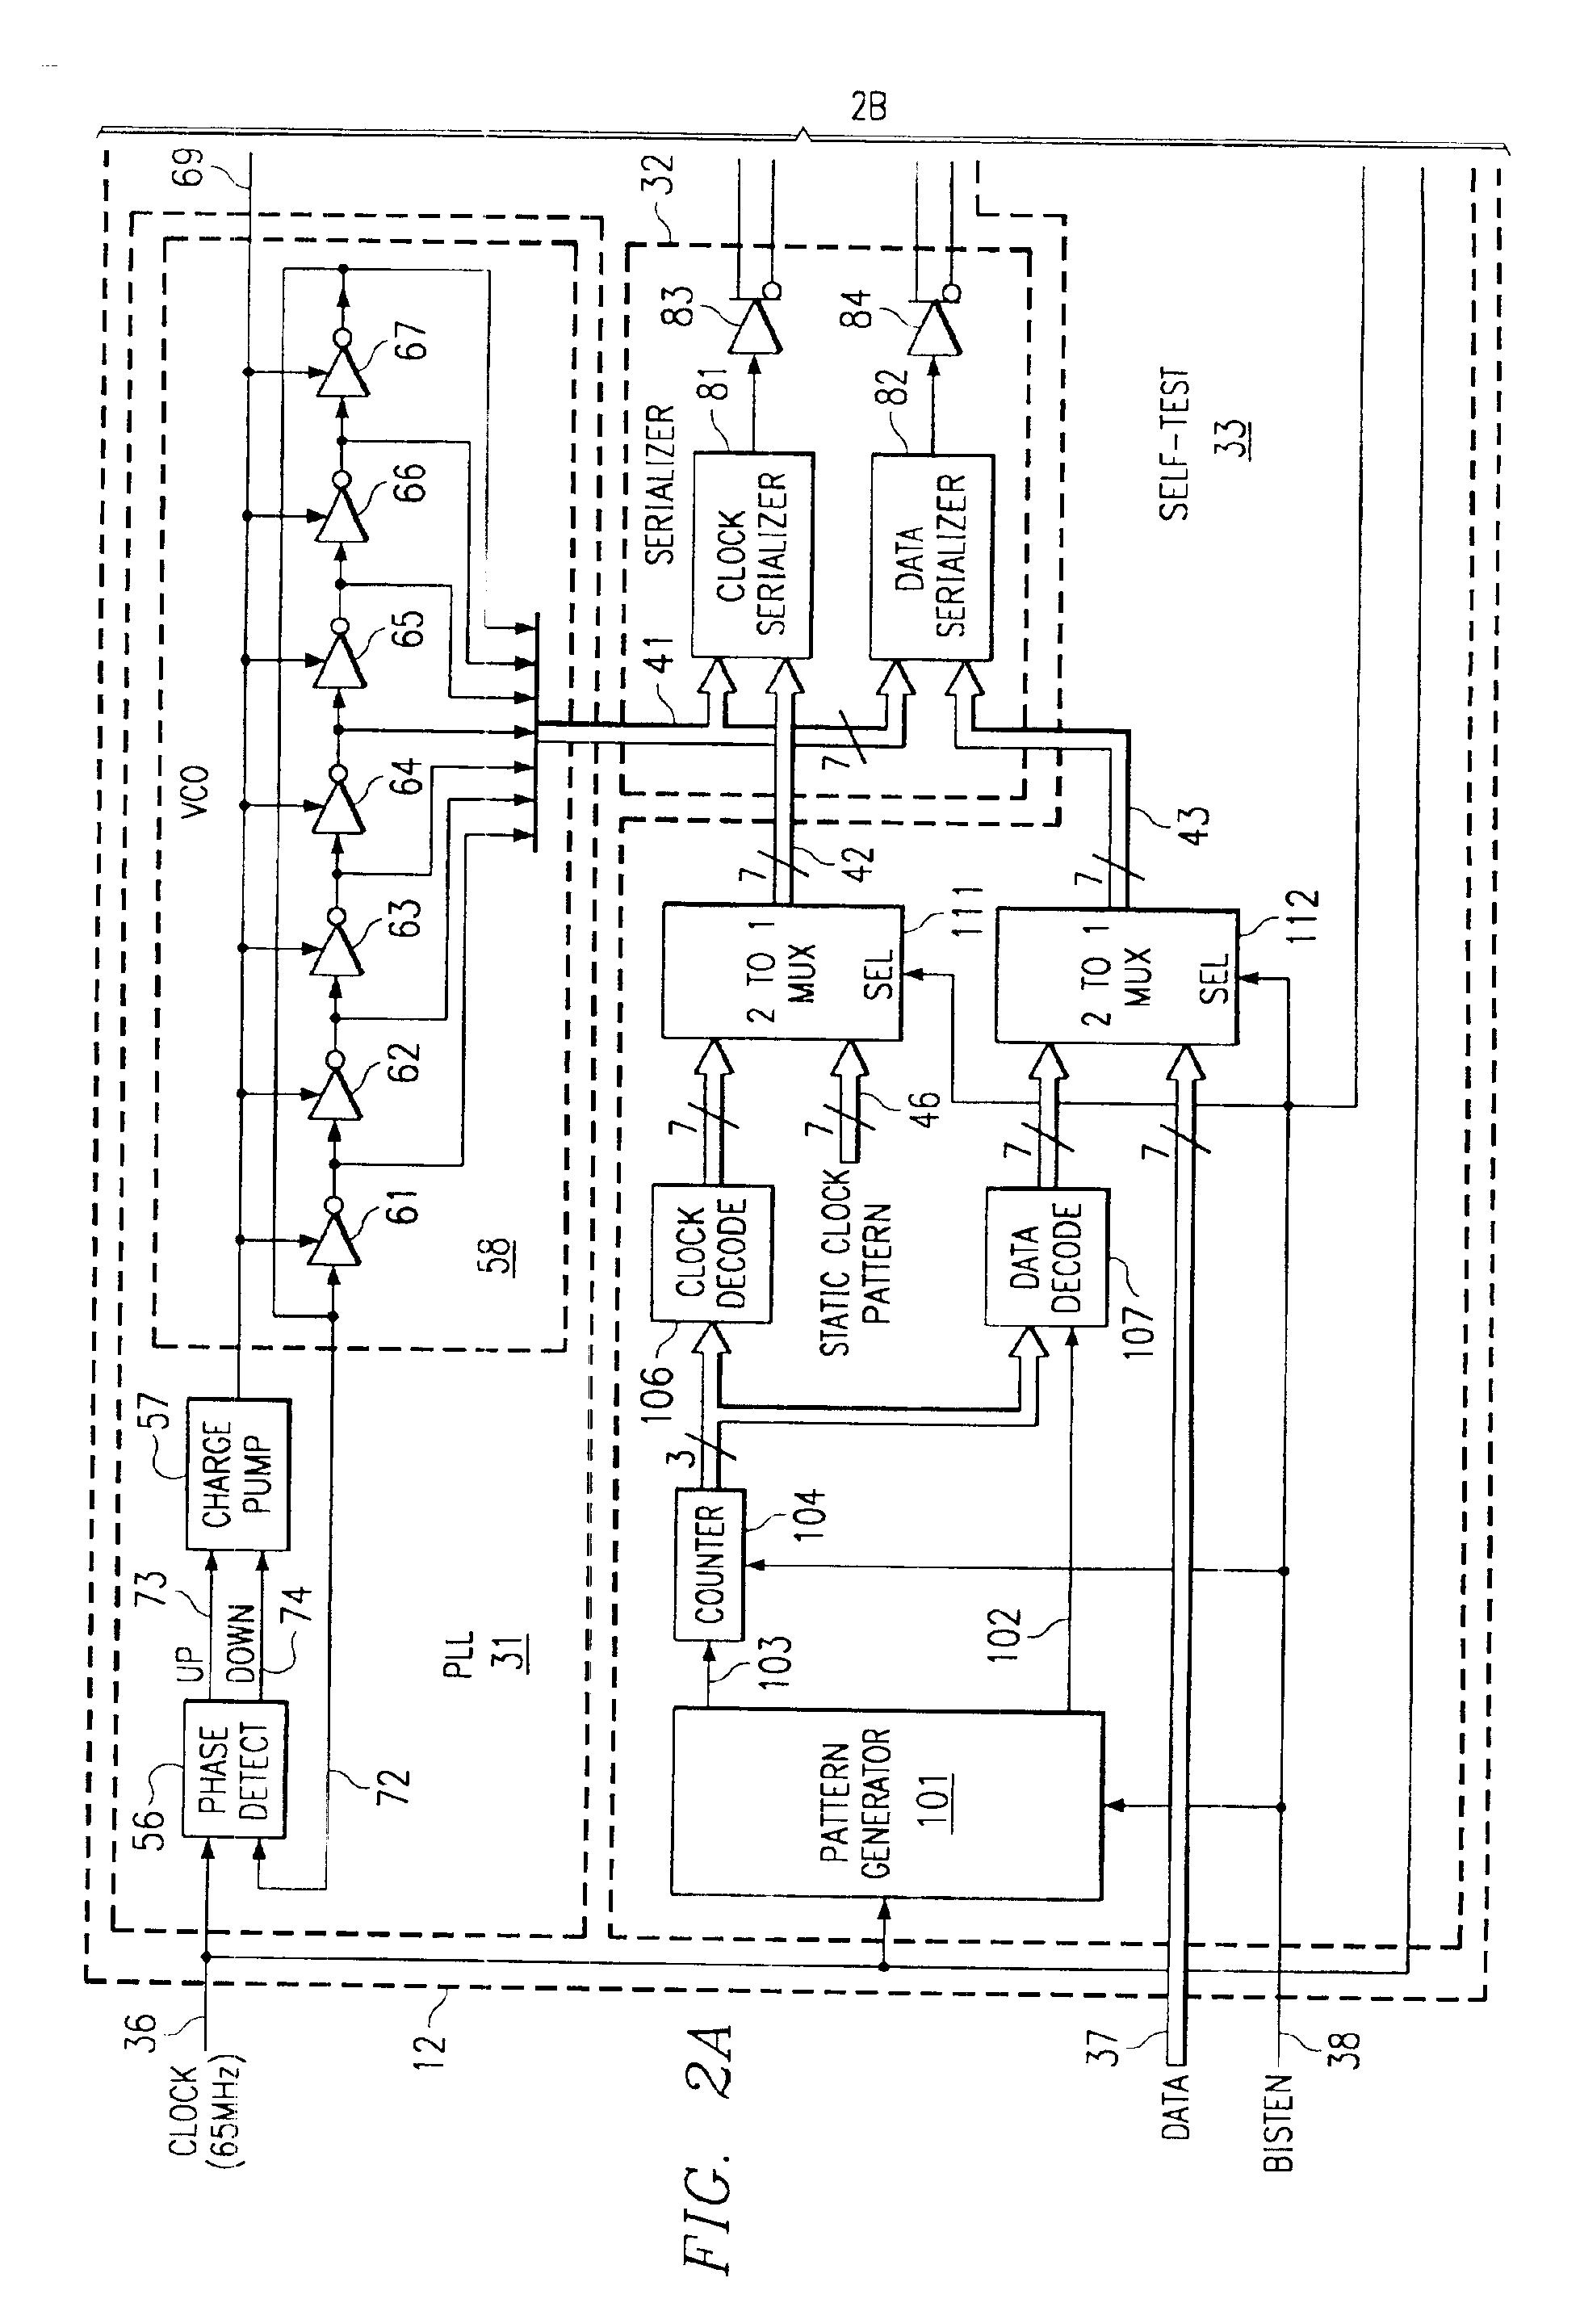 Method and apparatus for testing a serial transmitter circuit